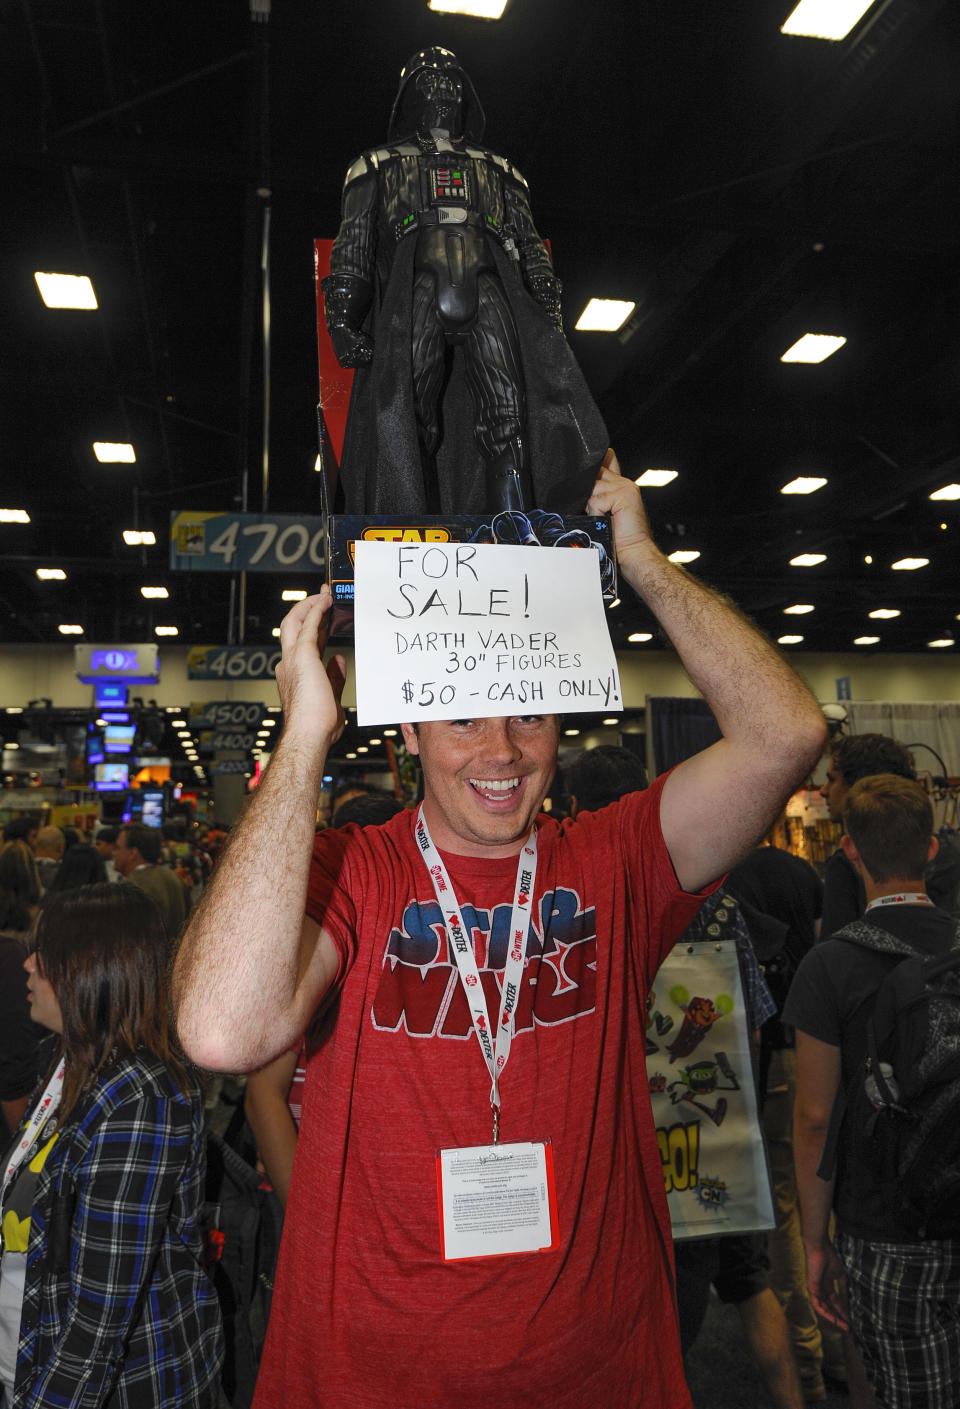 A fan carries a Star Wars Darth Vader figure he has for sale as he walks through the exhibit hall during the Preview Night event on Day 1 of the 2013 Comic-Con International Convention on Wednesday, July 17, 2013 in San Diego. (Photo by Denis Poroy/Invision/AP)